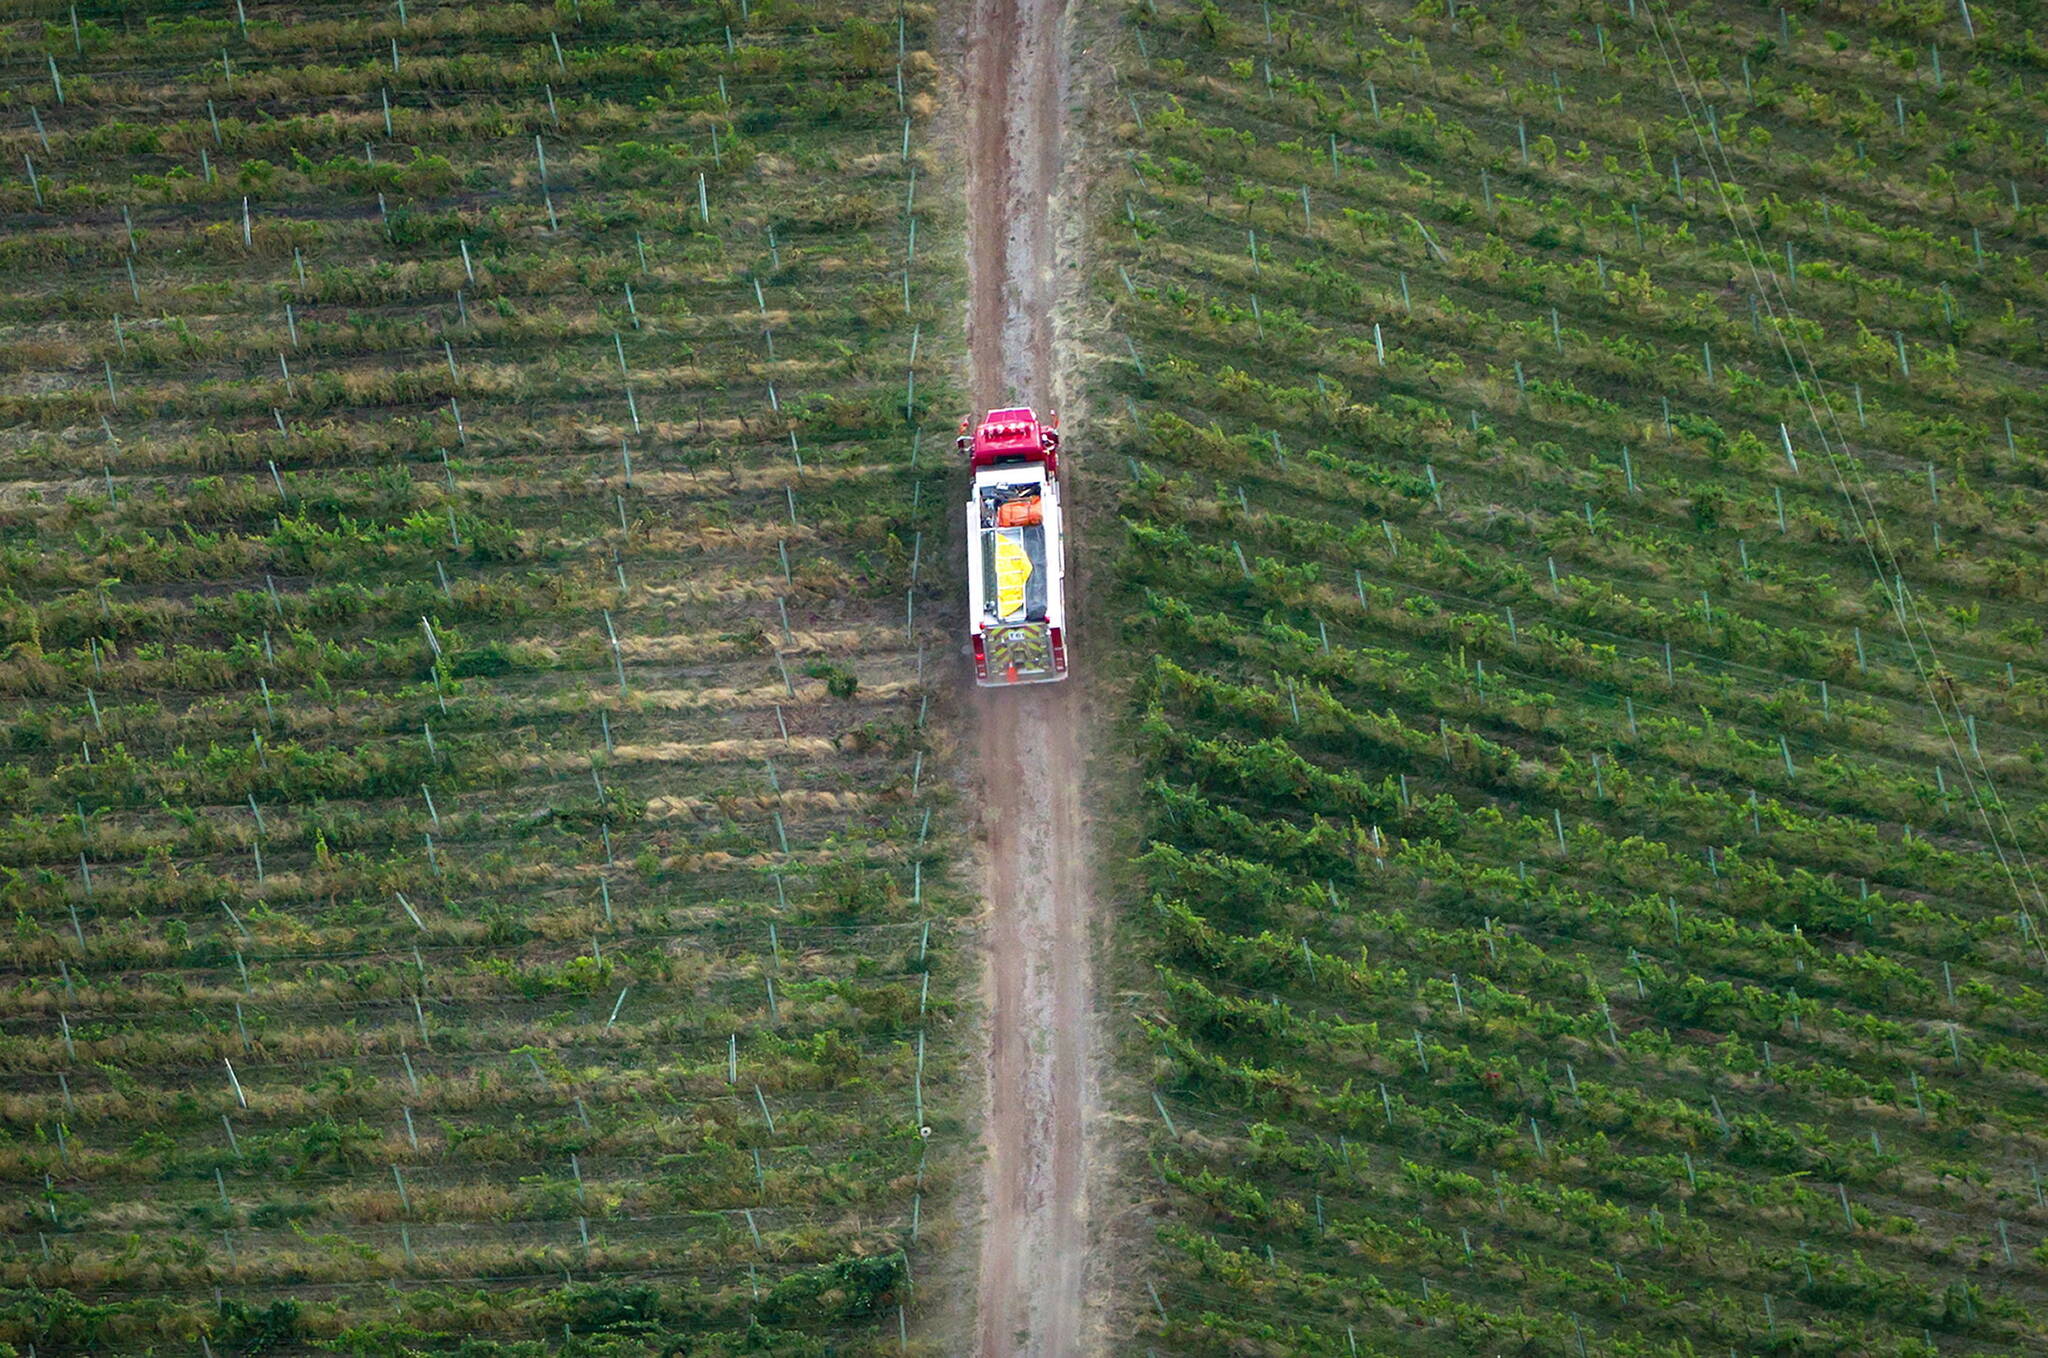 A fire truck is driven through a vineyard while battling a wildfire in Peachland, B.C., on Monday September 10, 2012. Consumers can expect a smaller selection of local vintages hit retail shelves as British Columbia’s wine industry grapples with the fallout of two years’ worth of significant crop losses from cold snaps that followed severe wildfires. THE CANADIAN PRESS/Darryl Dyck